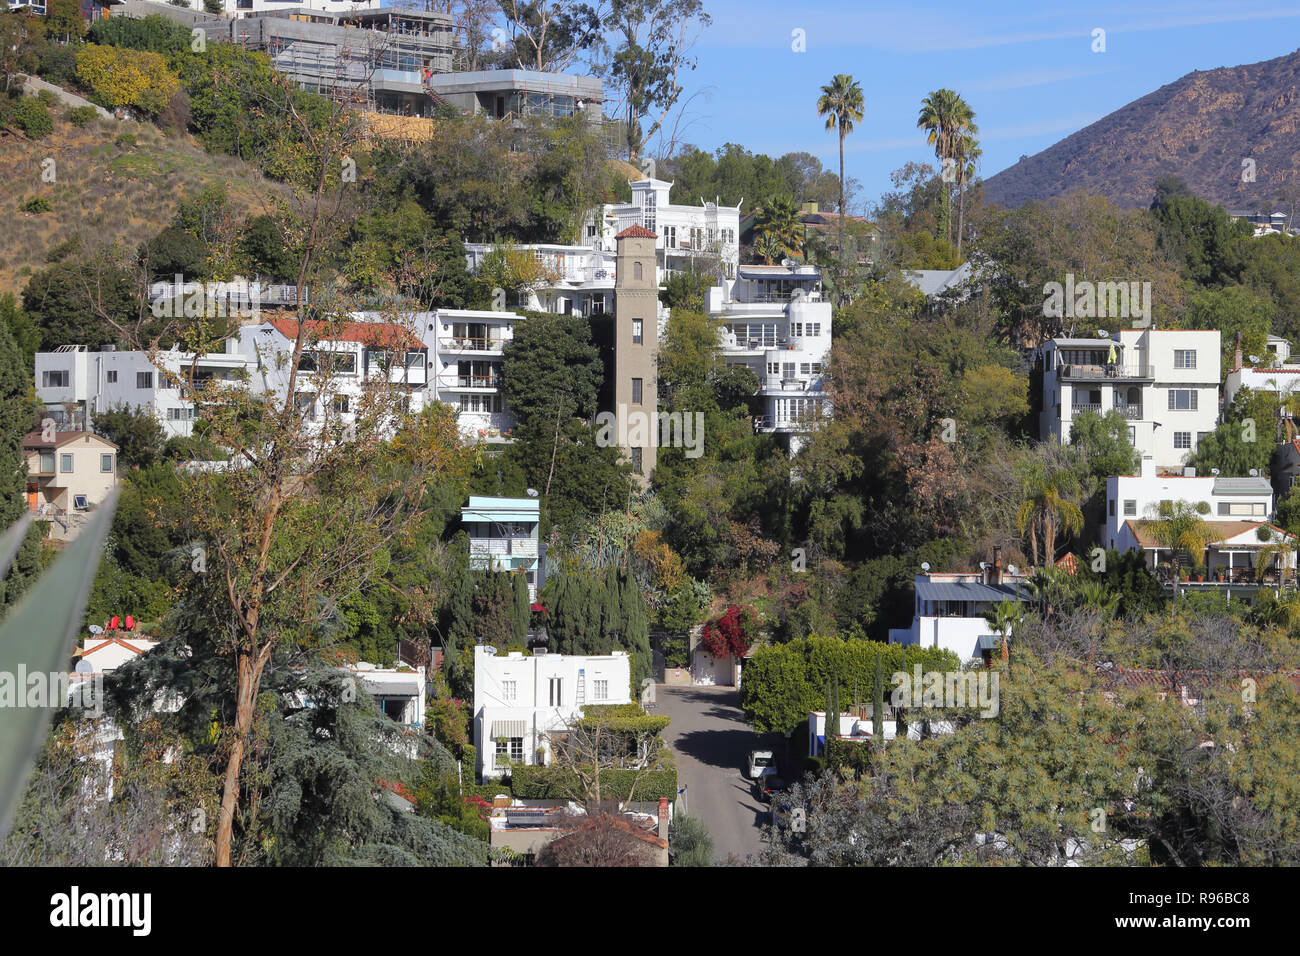 Hollywood, CA / USA - Dec. 19, 2018: In the center of the view, High Tower Elevator is shown among homes and duplex units it serves in Los Angeles. Stock Photo